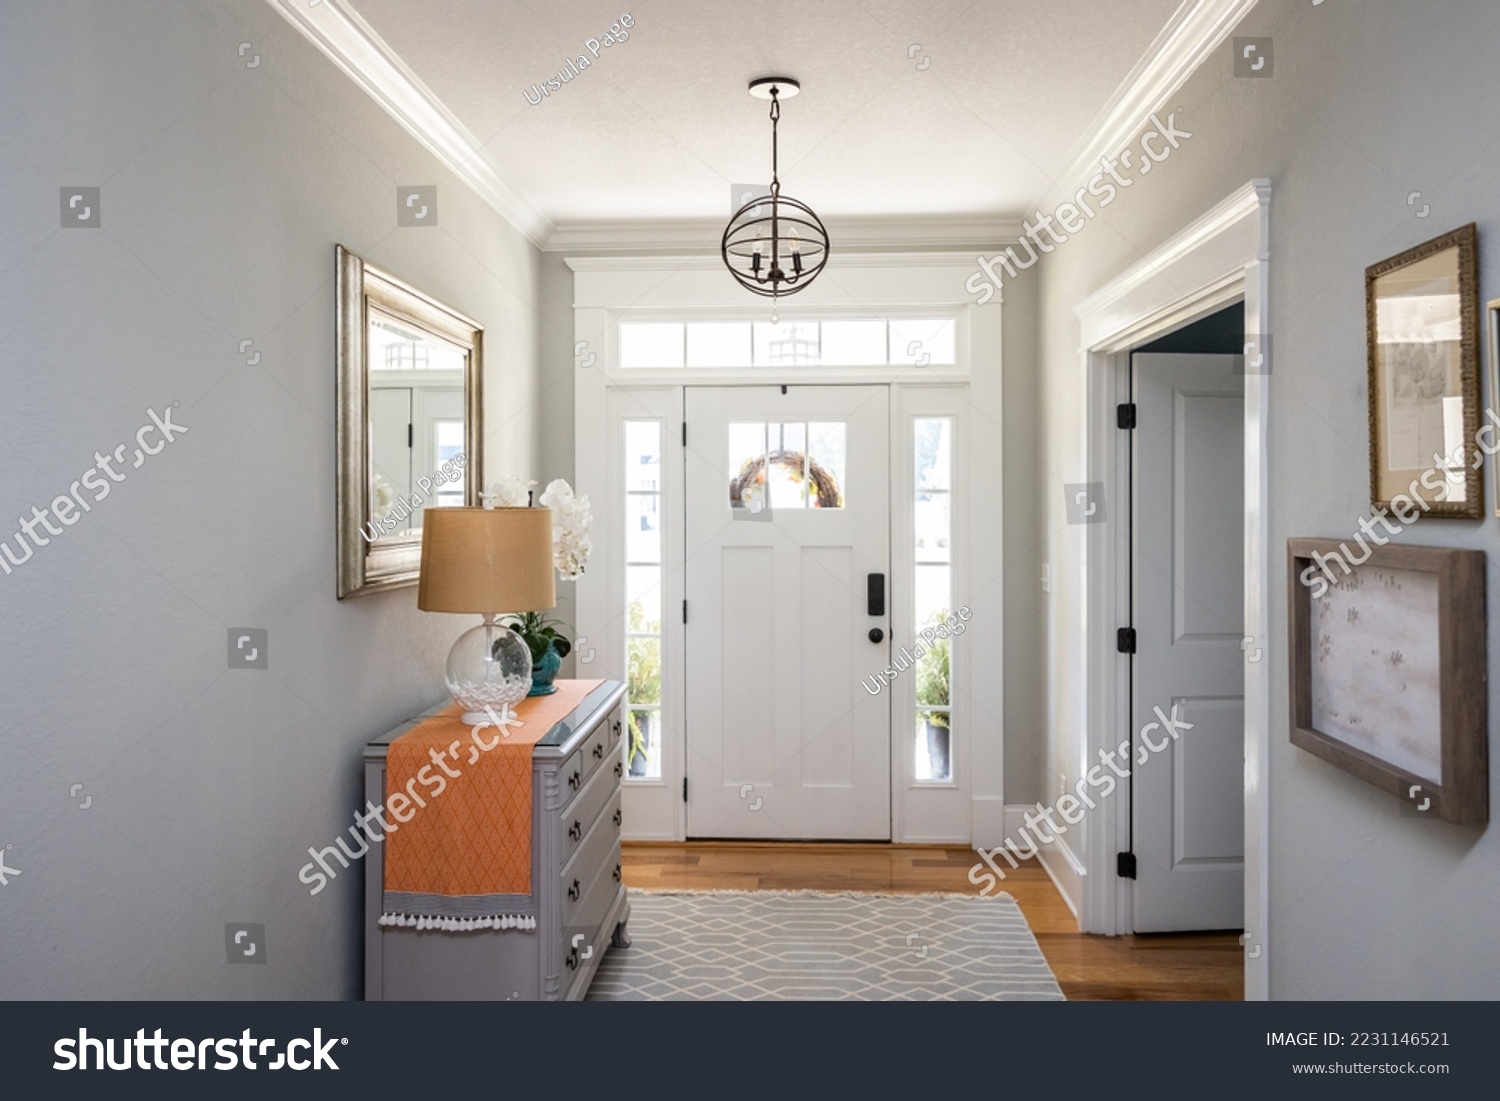 An open large and wide interior front door hallway foyer with transom, hanging light fixture, coastal colors and entry way table and wood floors. #2231146521